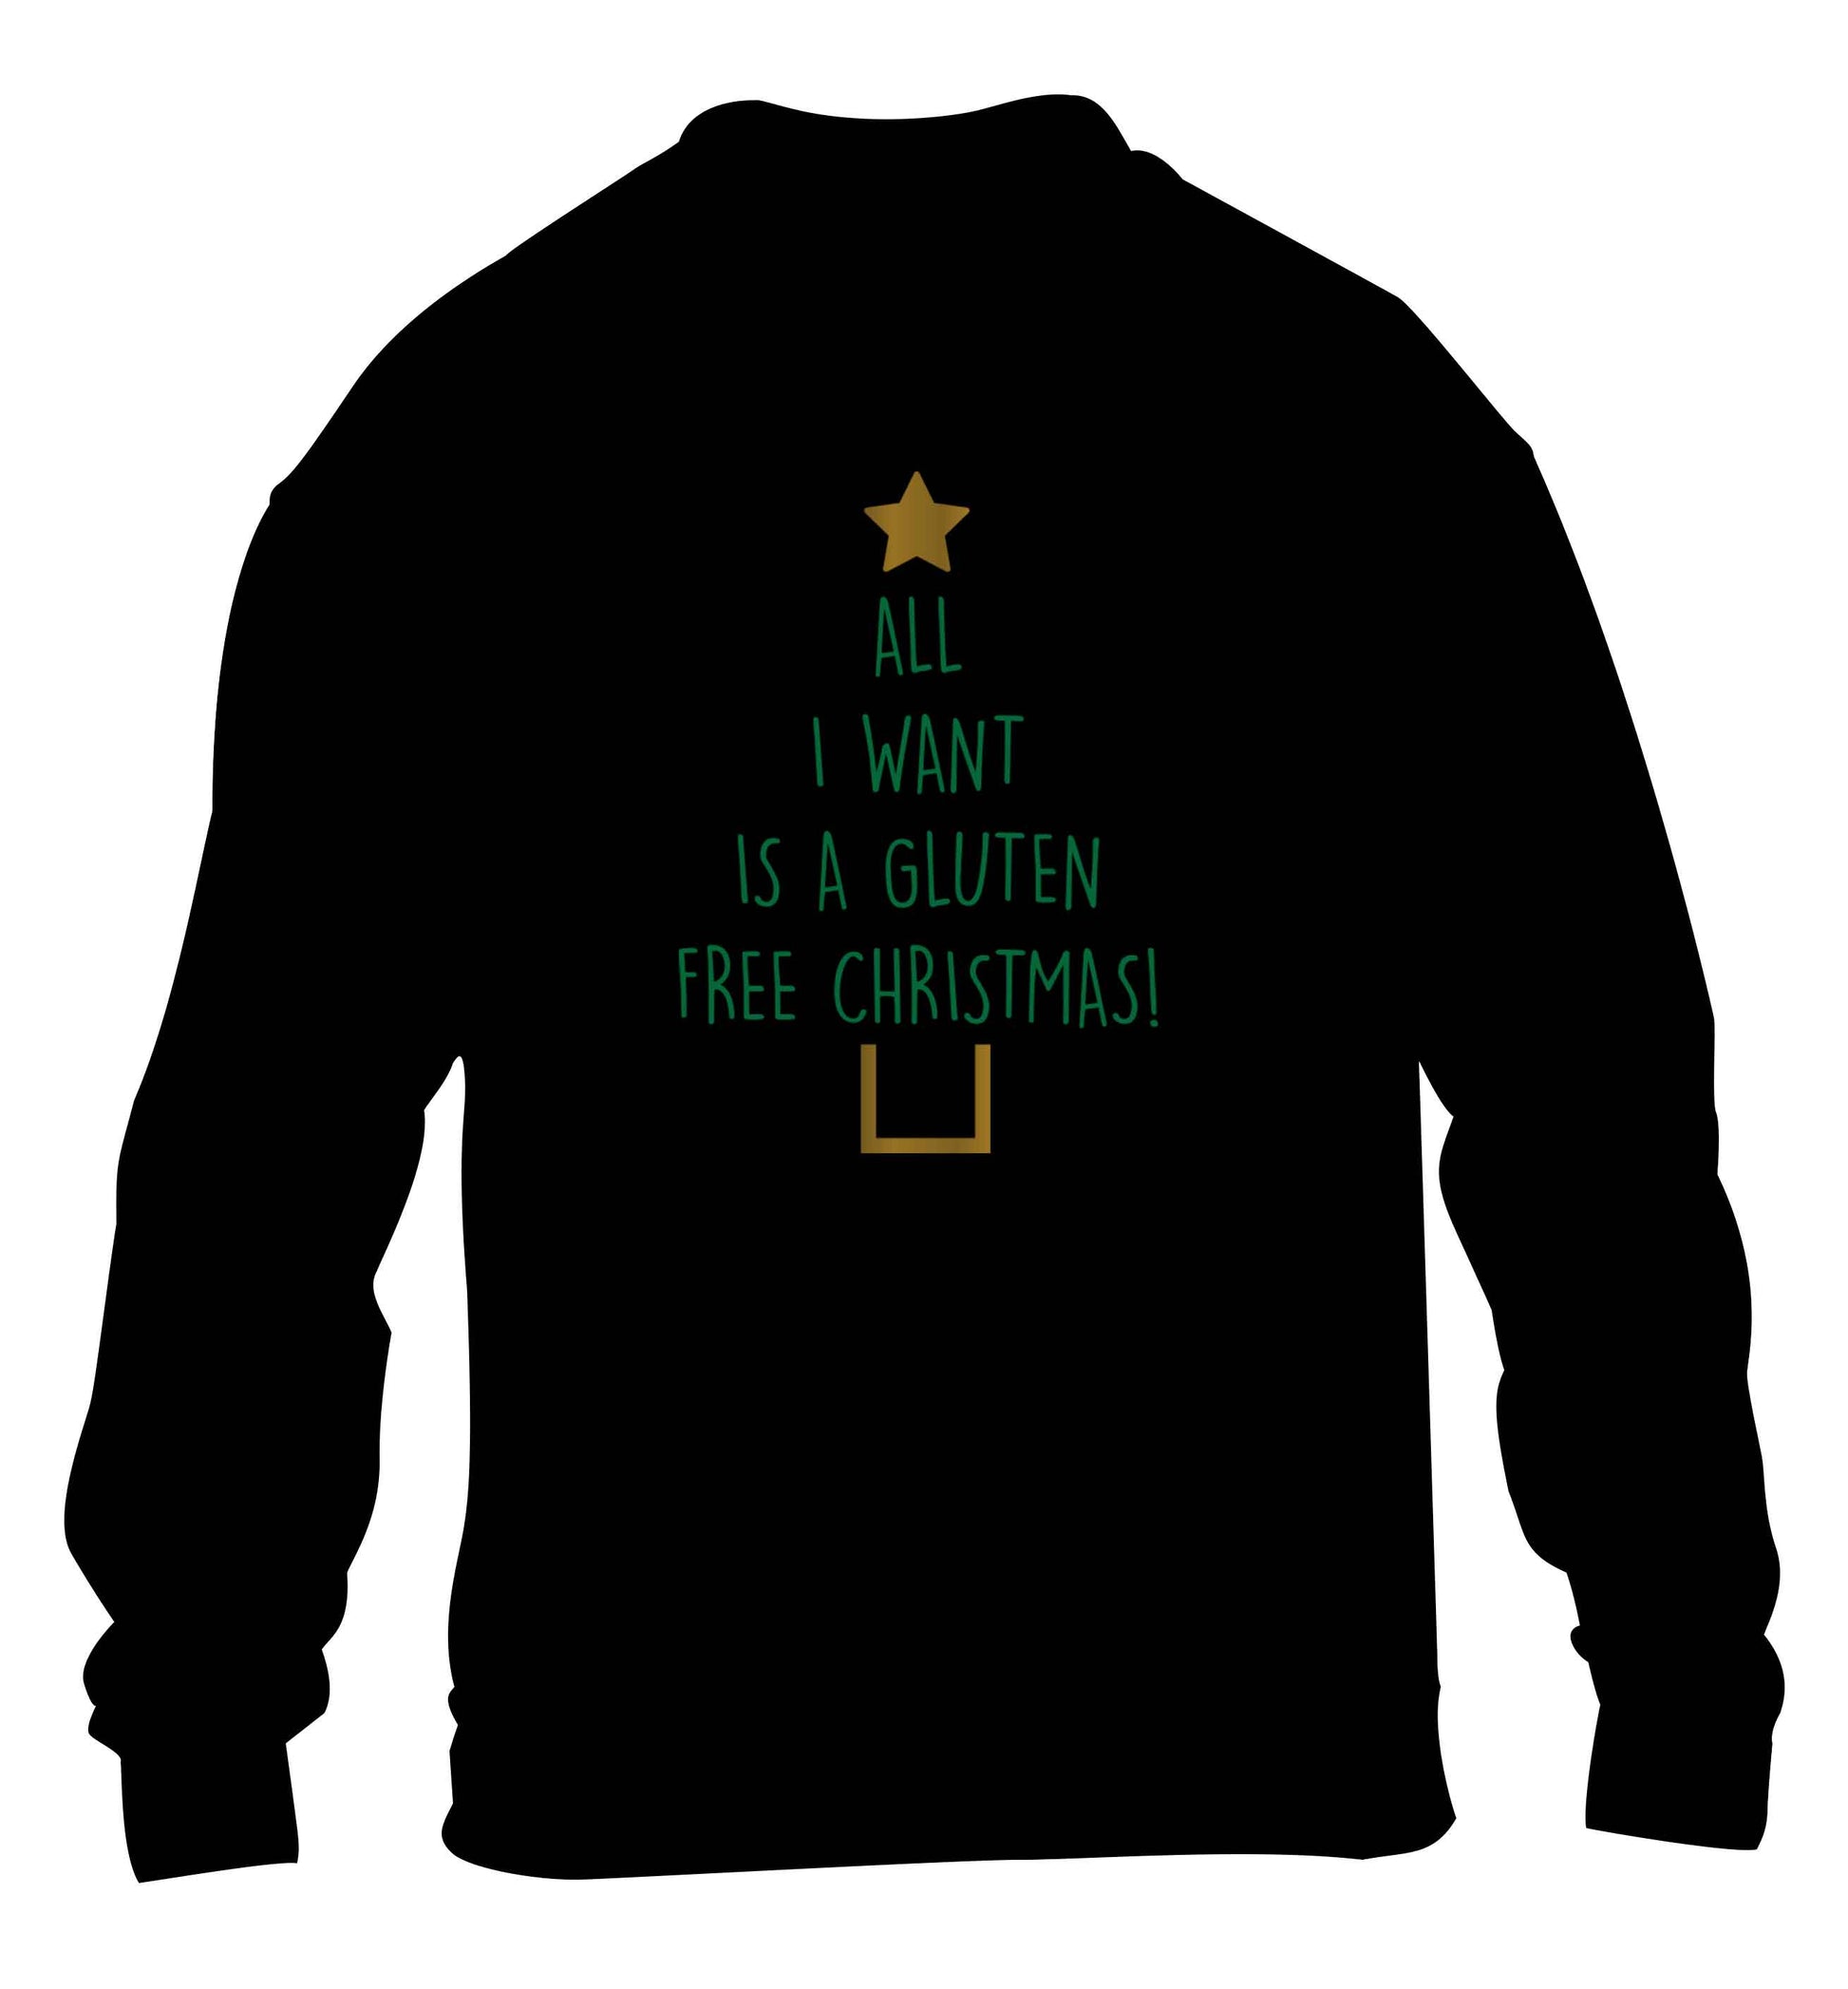 All I want is a gluten free Christmas children's black sweater 12-13 Years